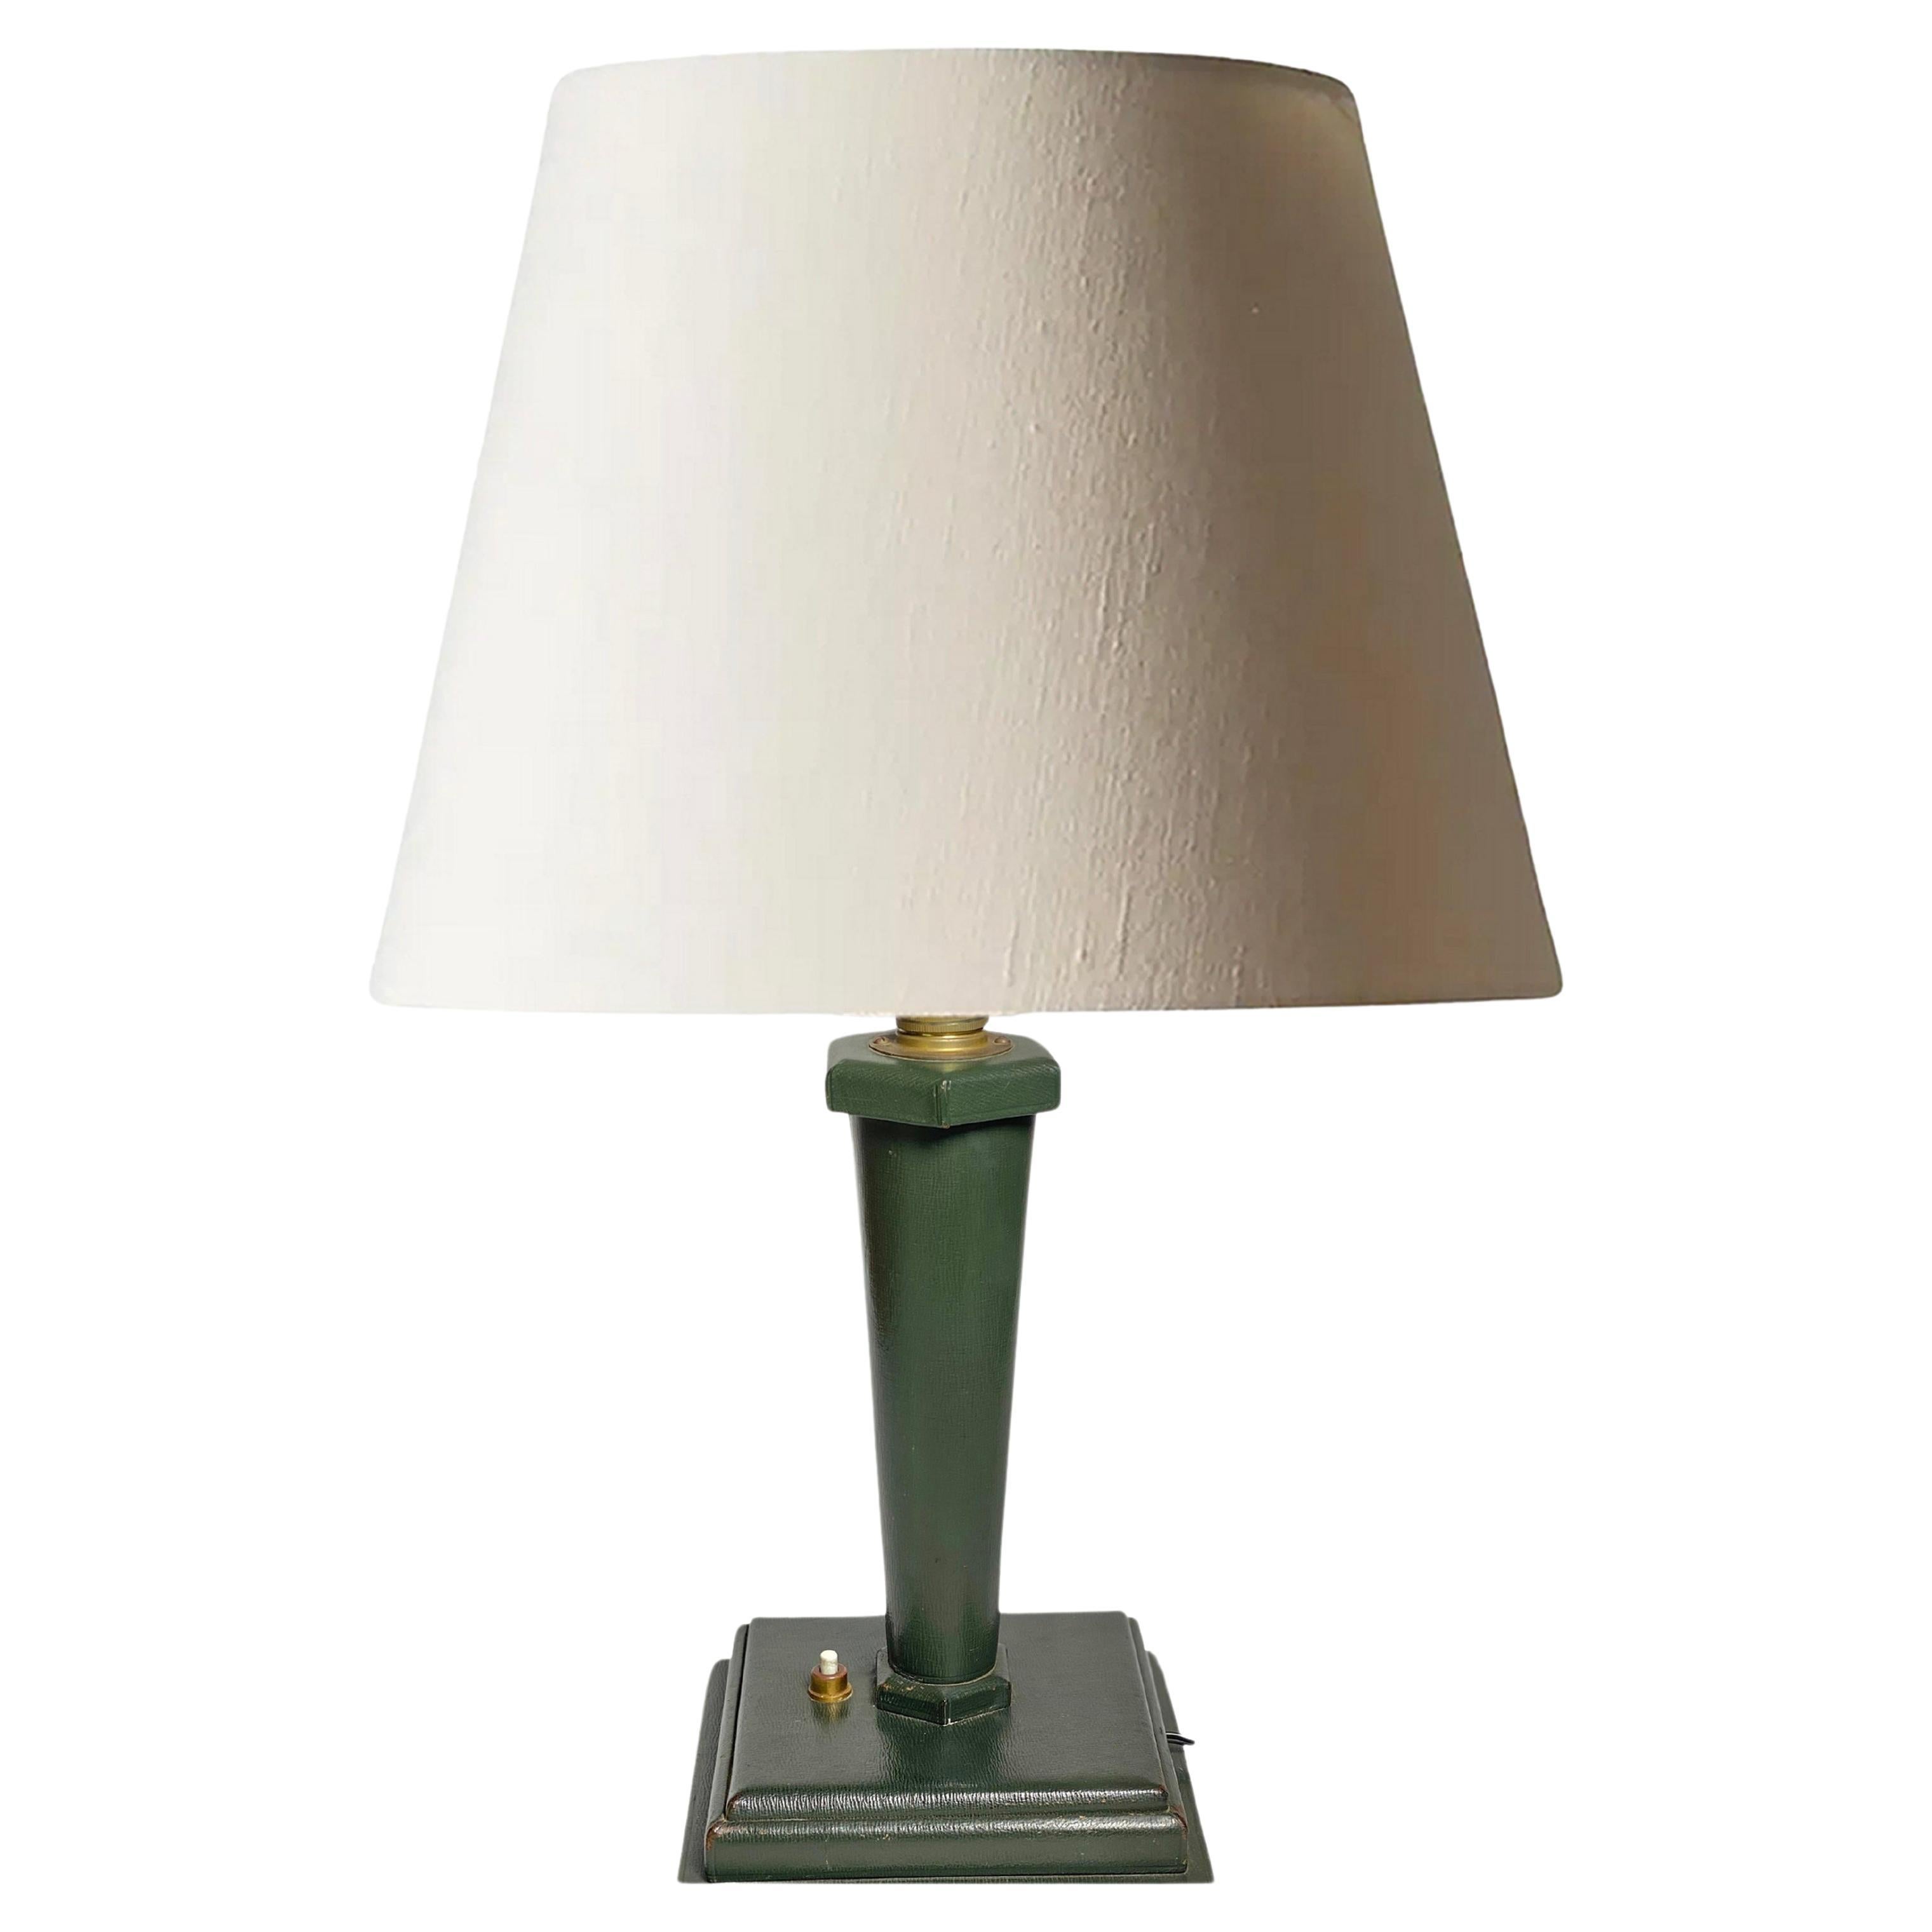 Jacques Adnet Style Table Lamp, Green Leather, France, circa 1940